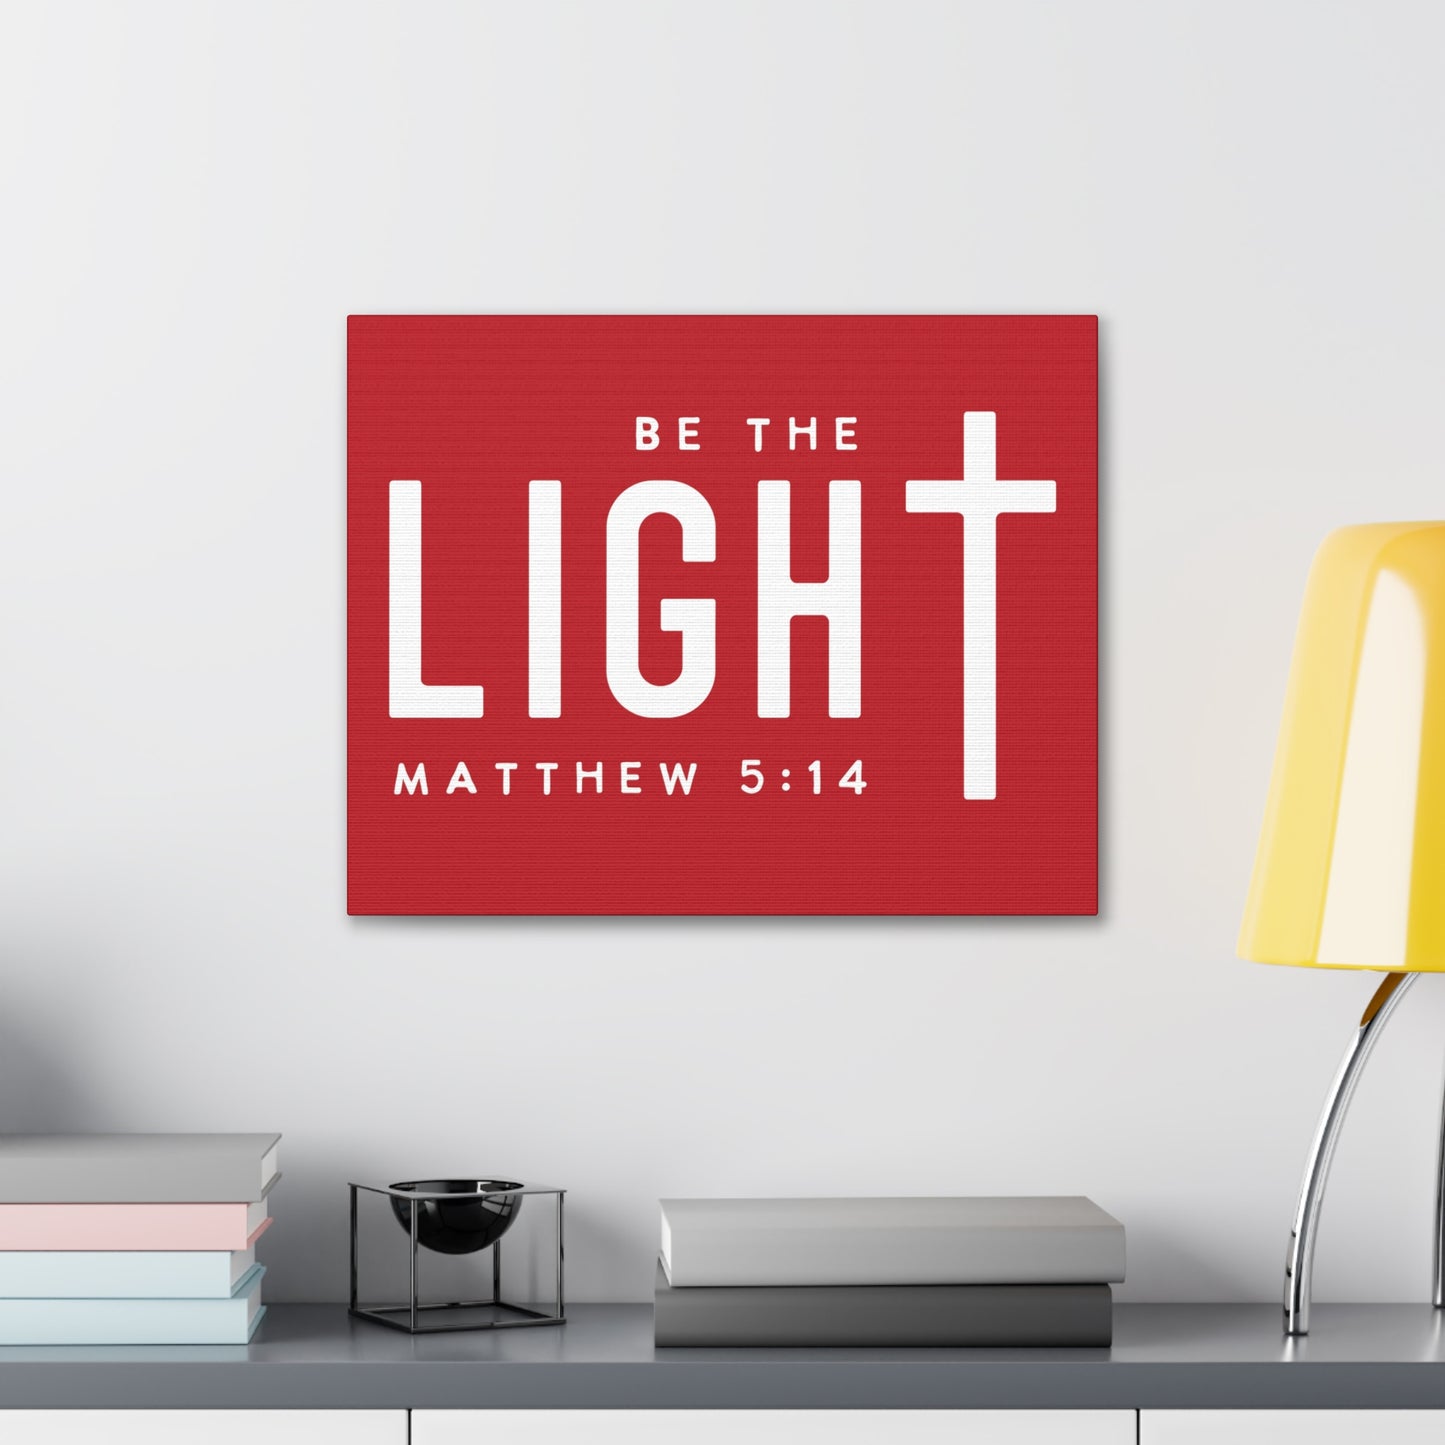 Be The Light Canvas Gallery Wrap: Free Shipping